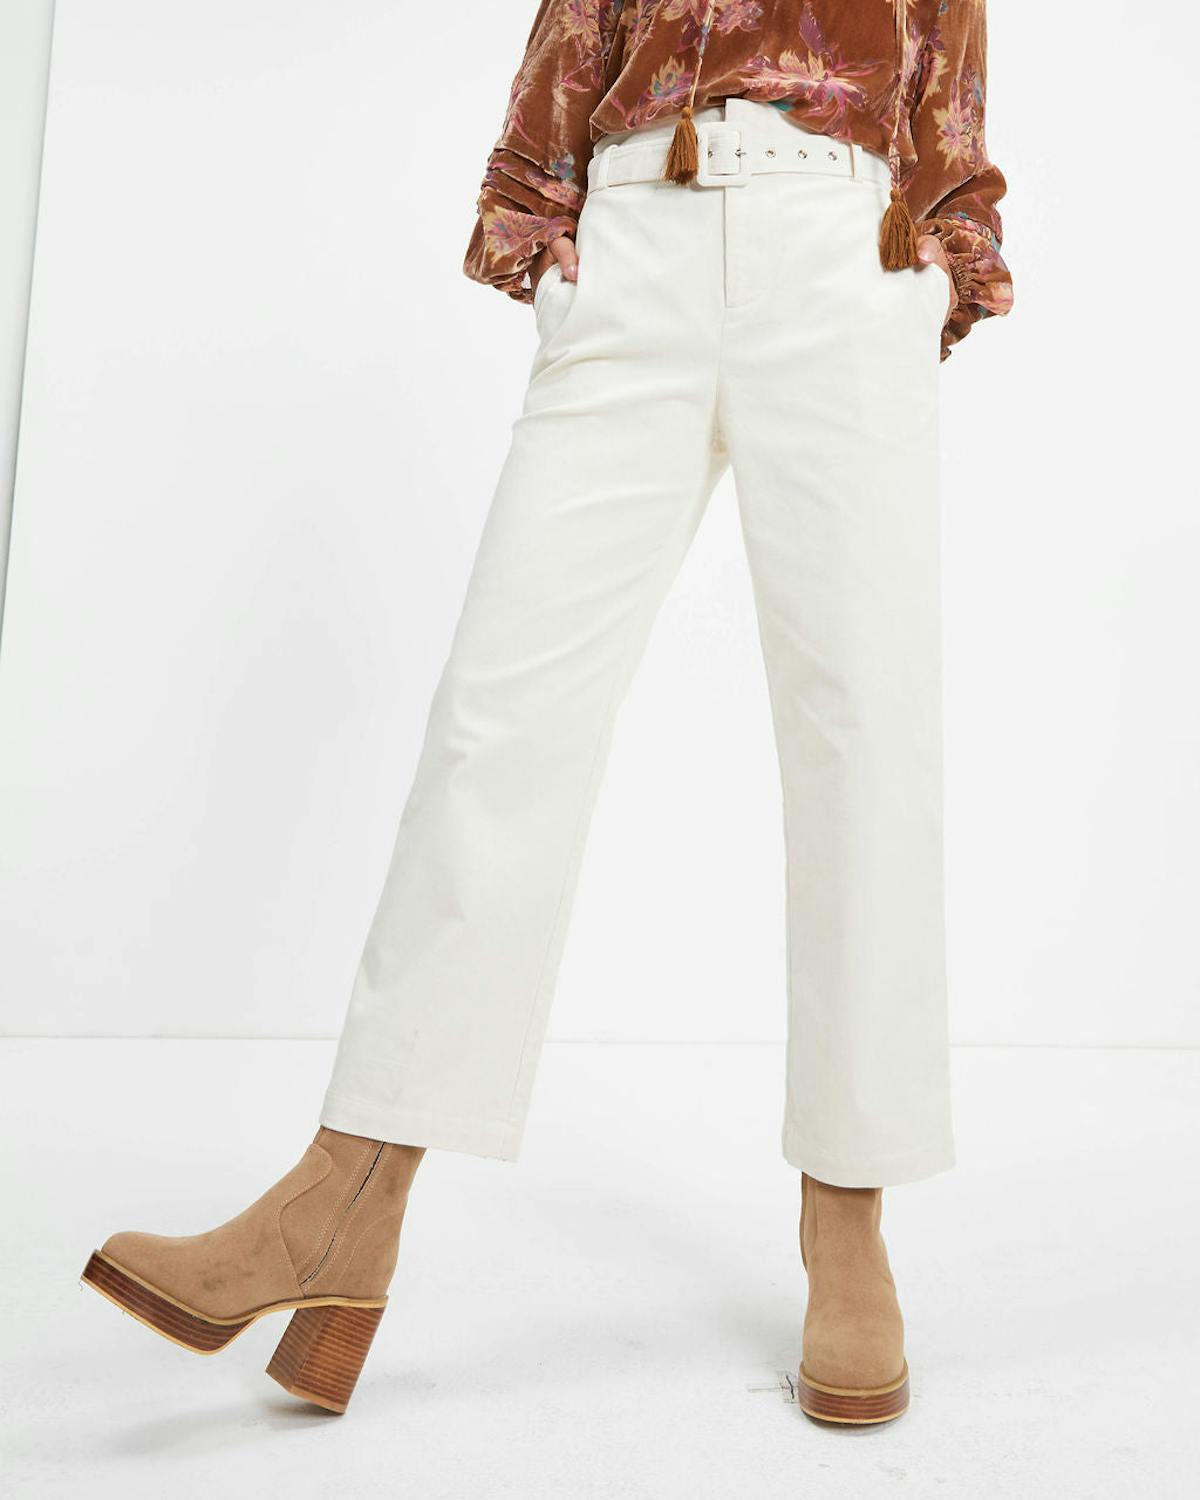 Winner Takes It All Pocketed Belted Corduroy Pants - Ivory - FINAL SALE view 1